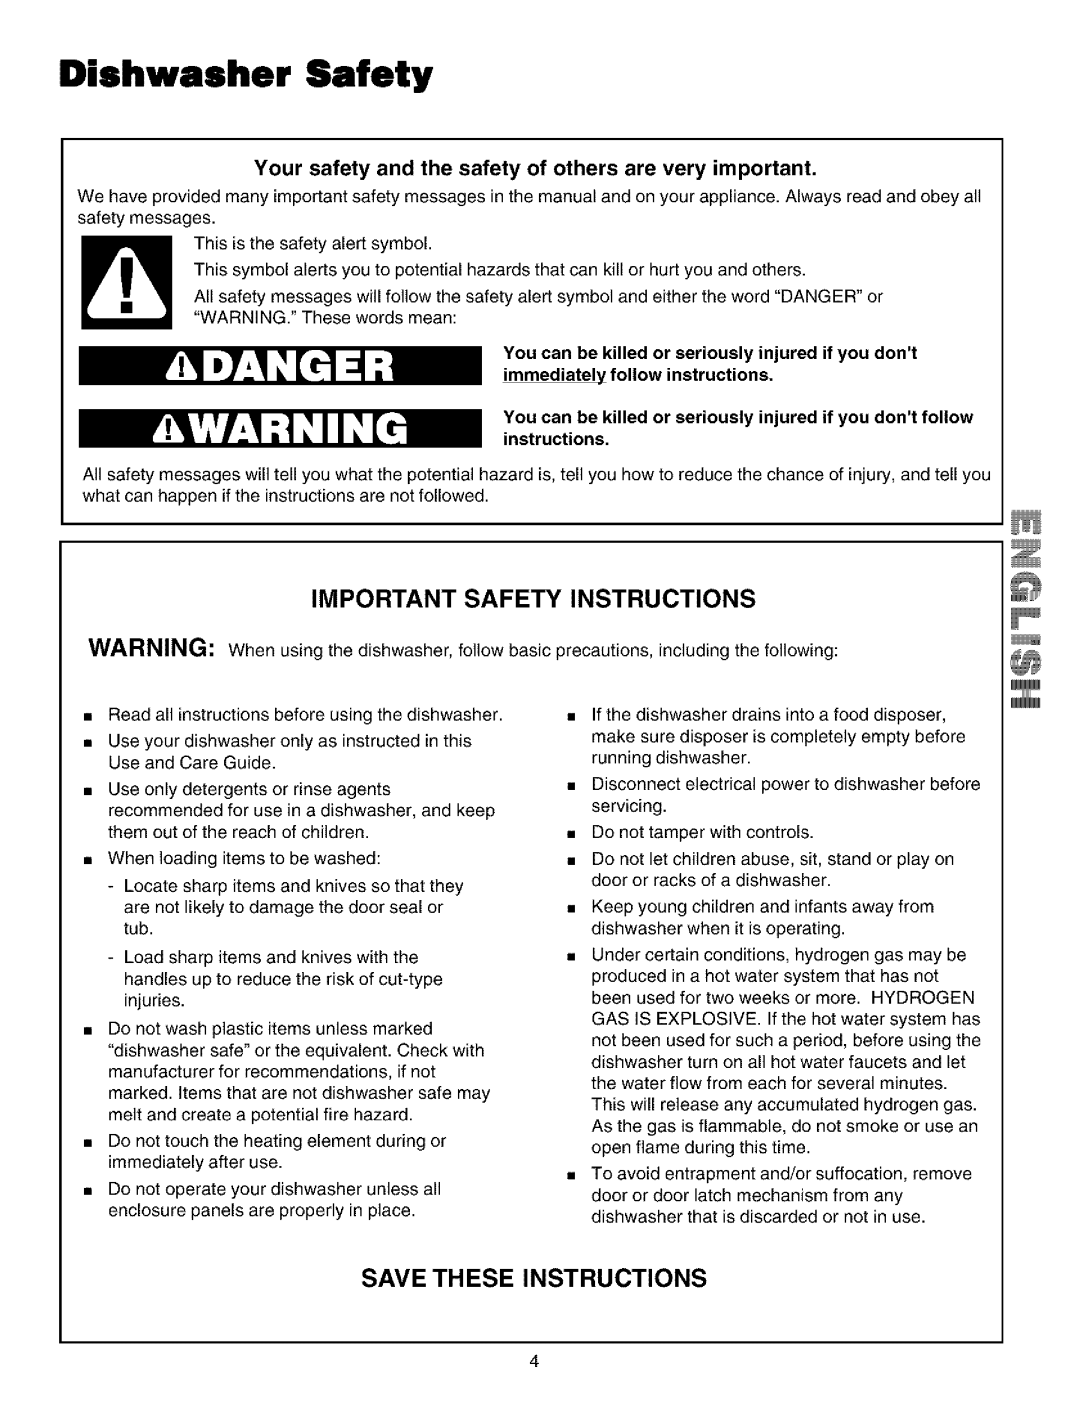 Kenmore 587.14202, 587.14209 manual Dishwasher Safety, Important Safety Instructions, Save These Instructions 